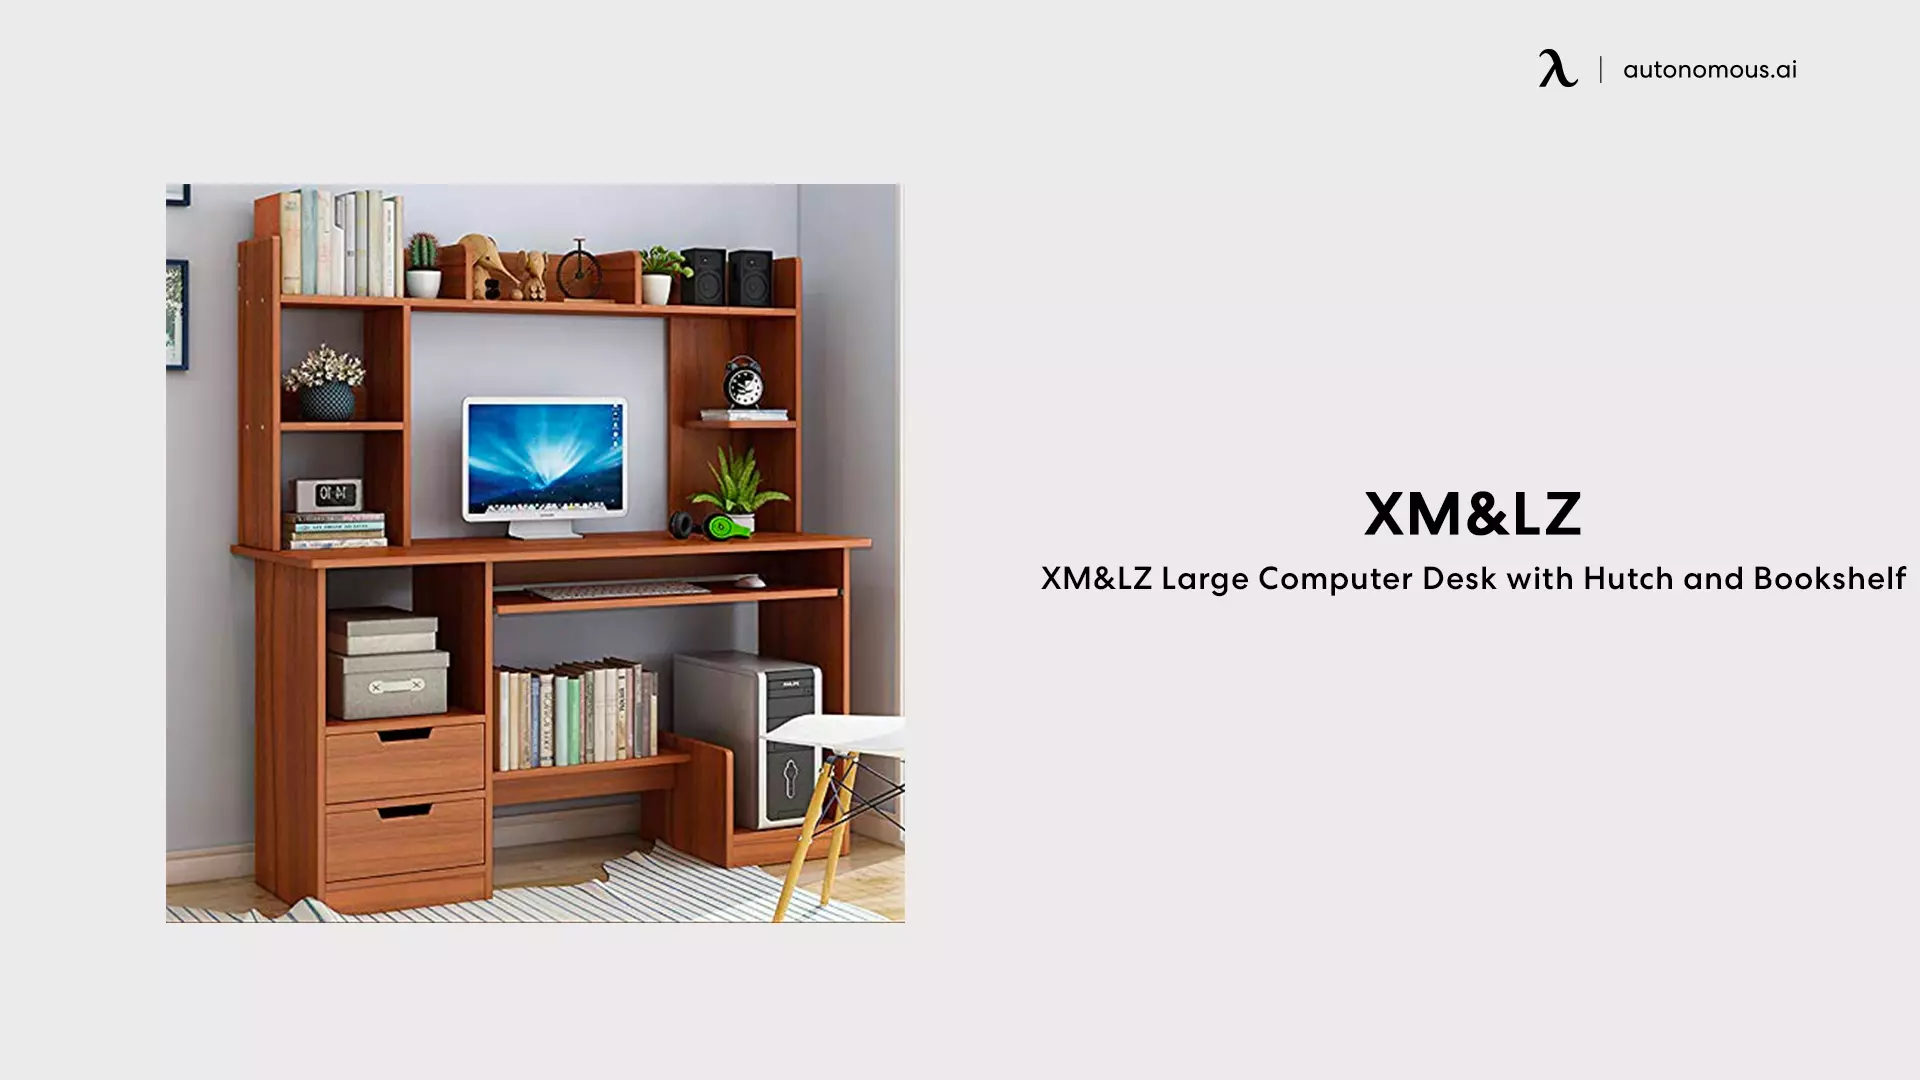 XM&LZ Large Computer Desk with Hutch and Bookshelf